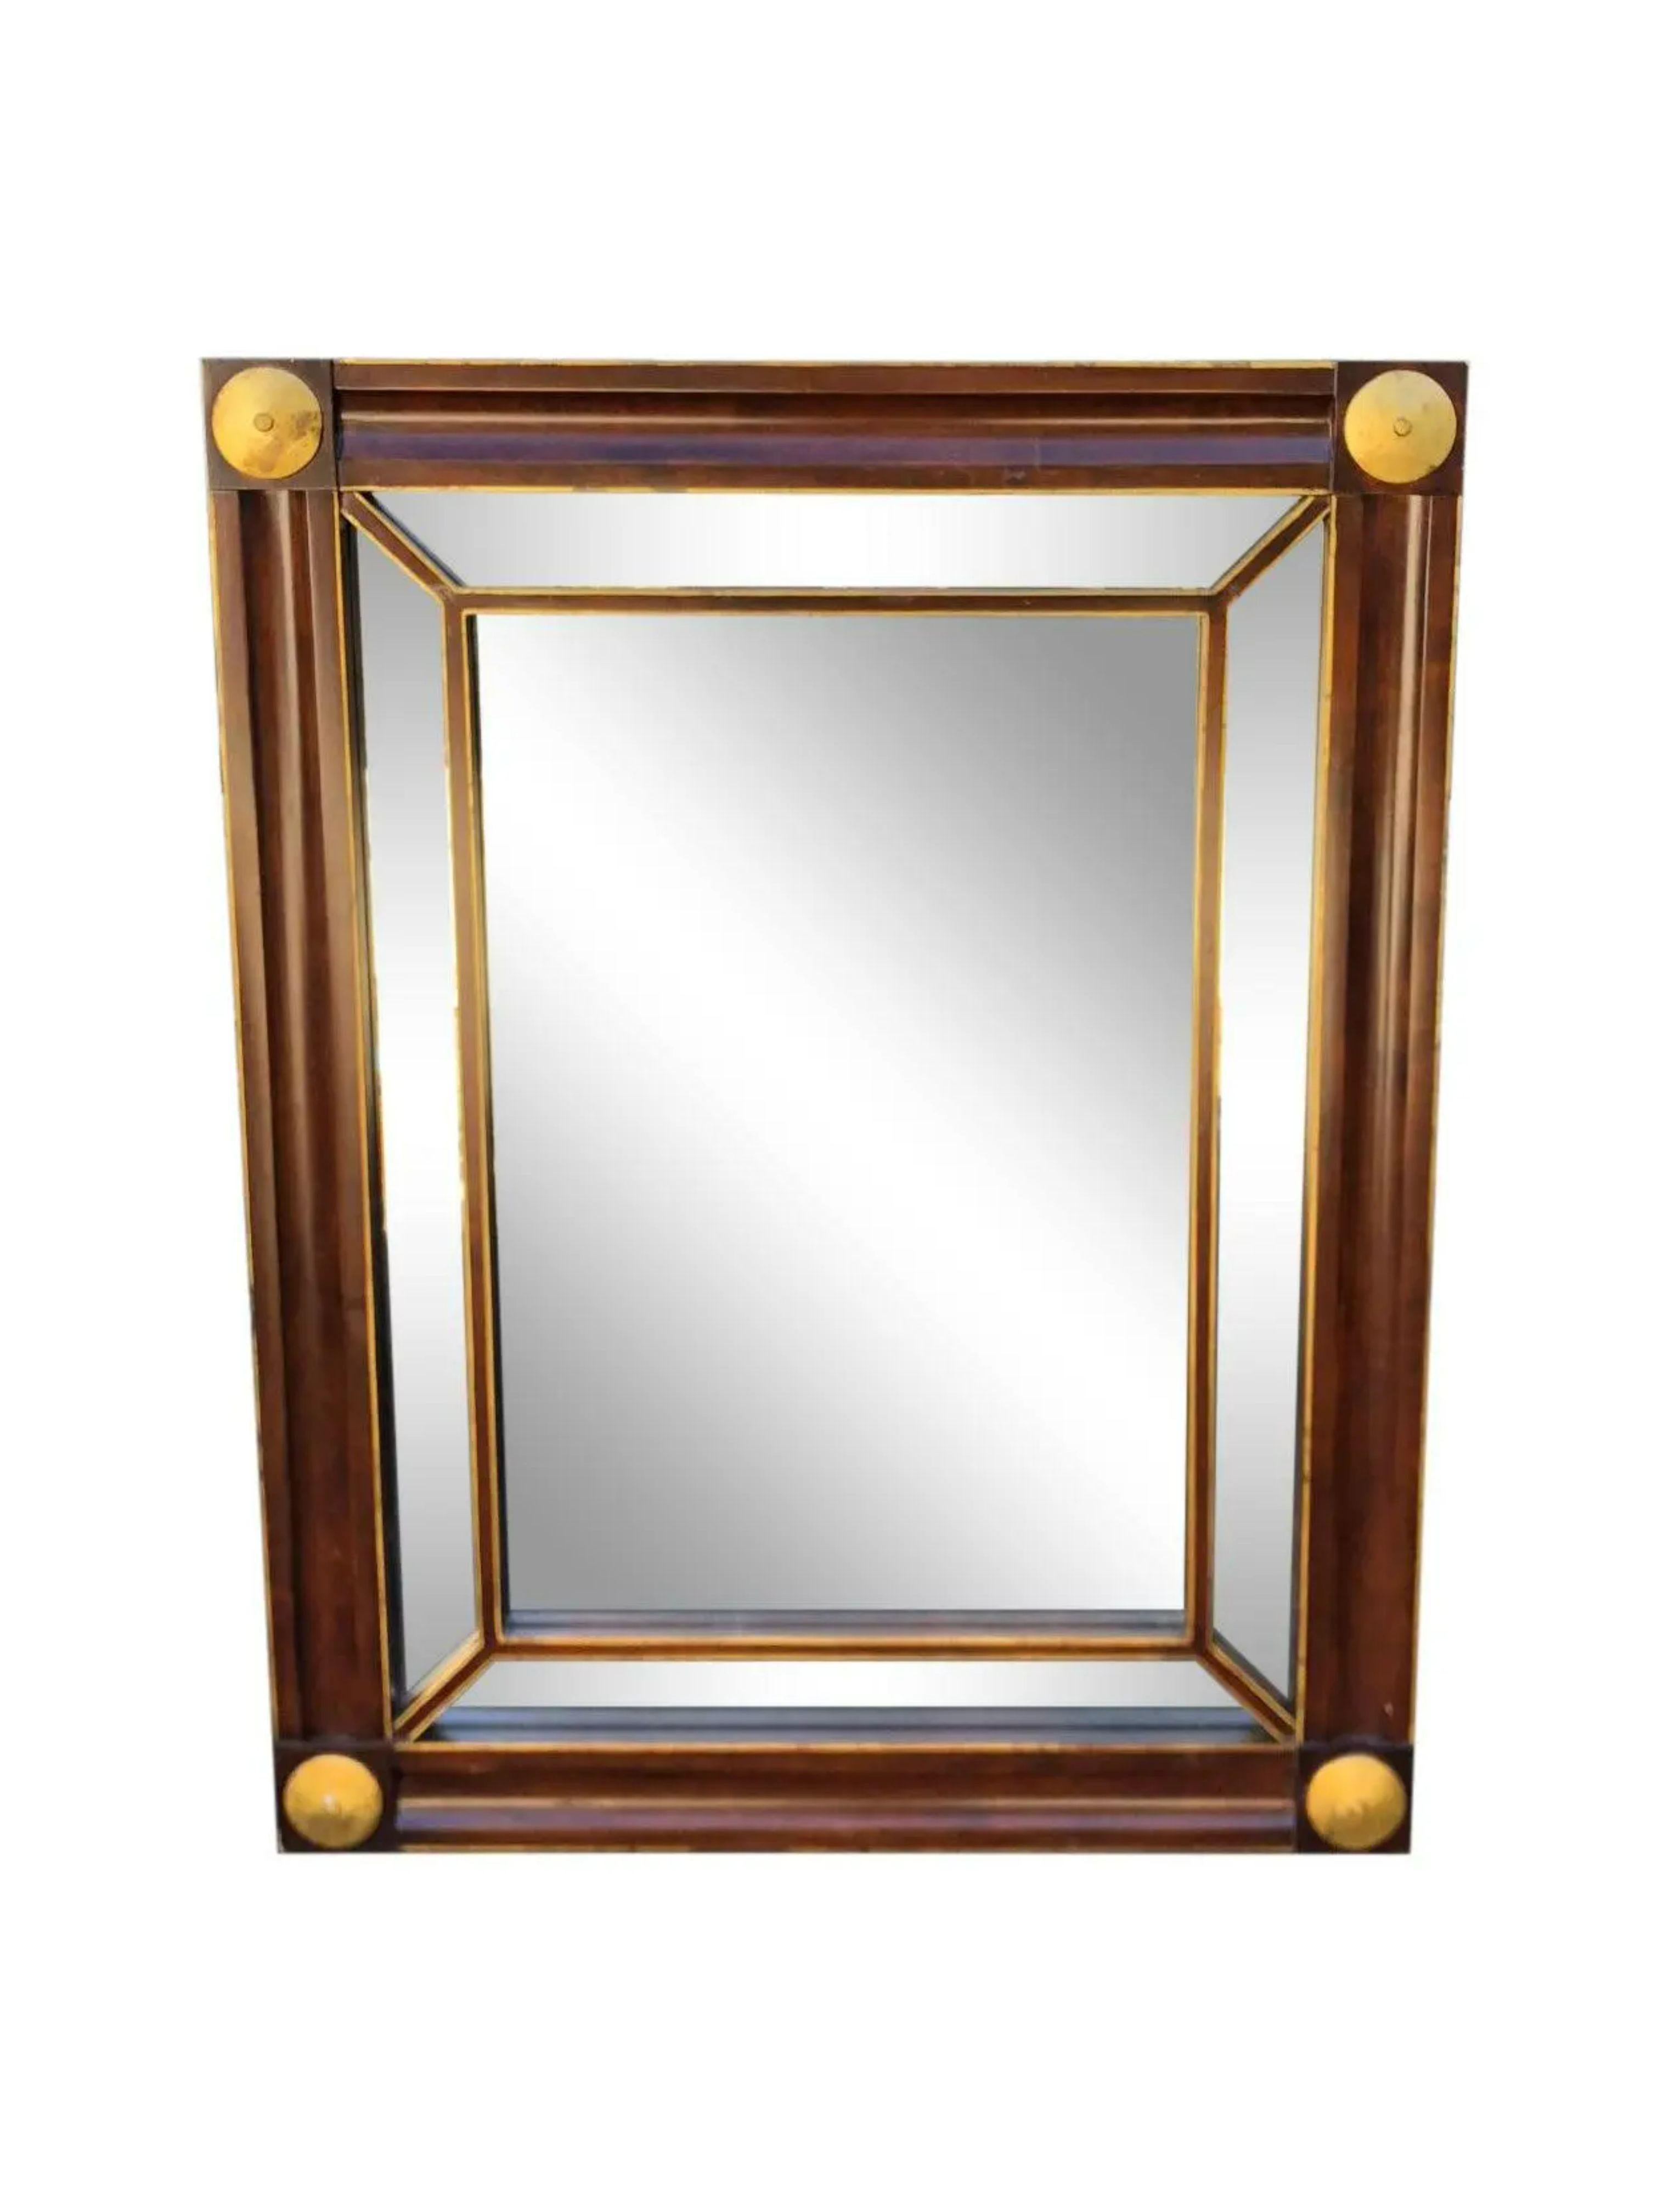 Baker Furniture Company Empire Mahogany & Gilt-Wood Mirror, 1990s In Good Condition For Sale In LOS ANGELES, CA